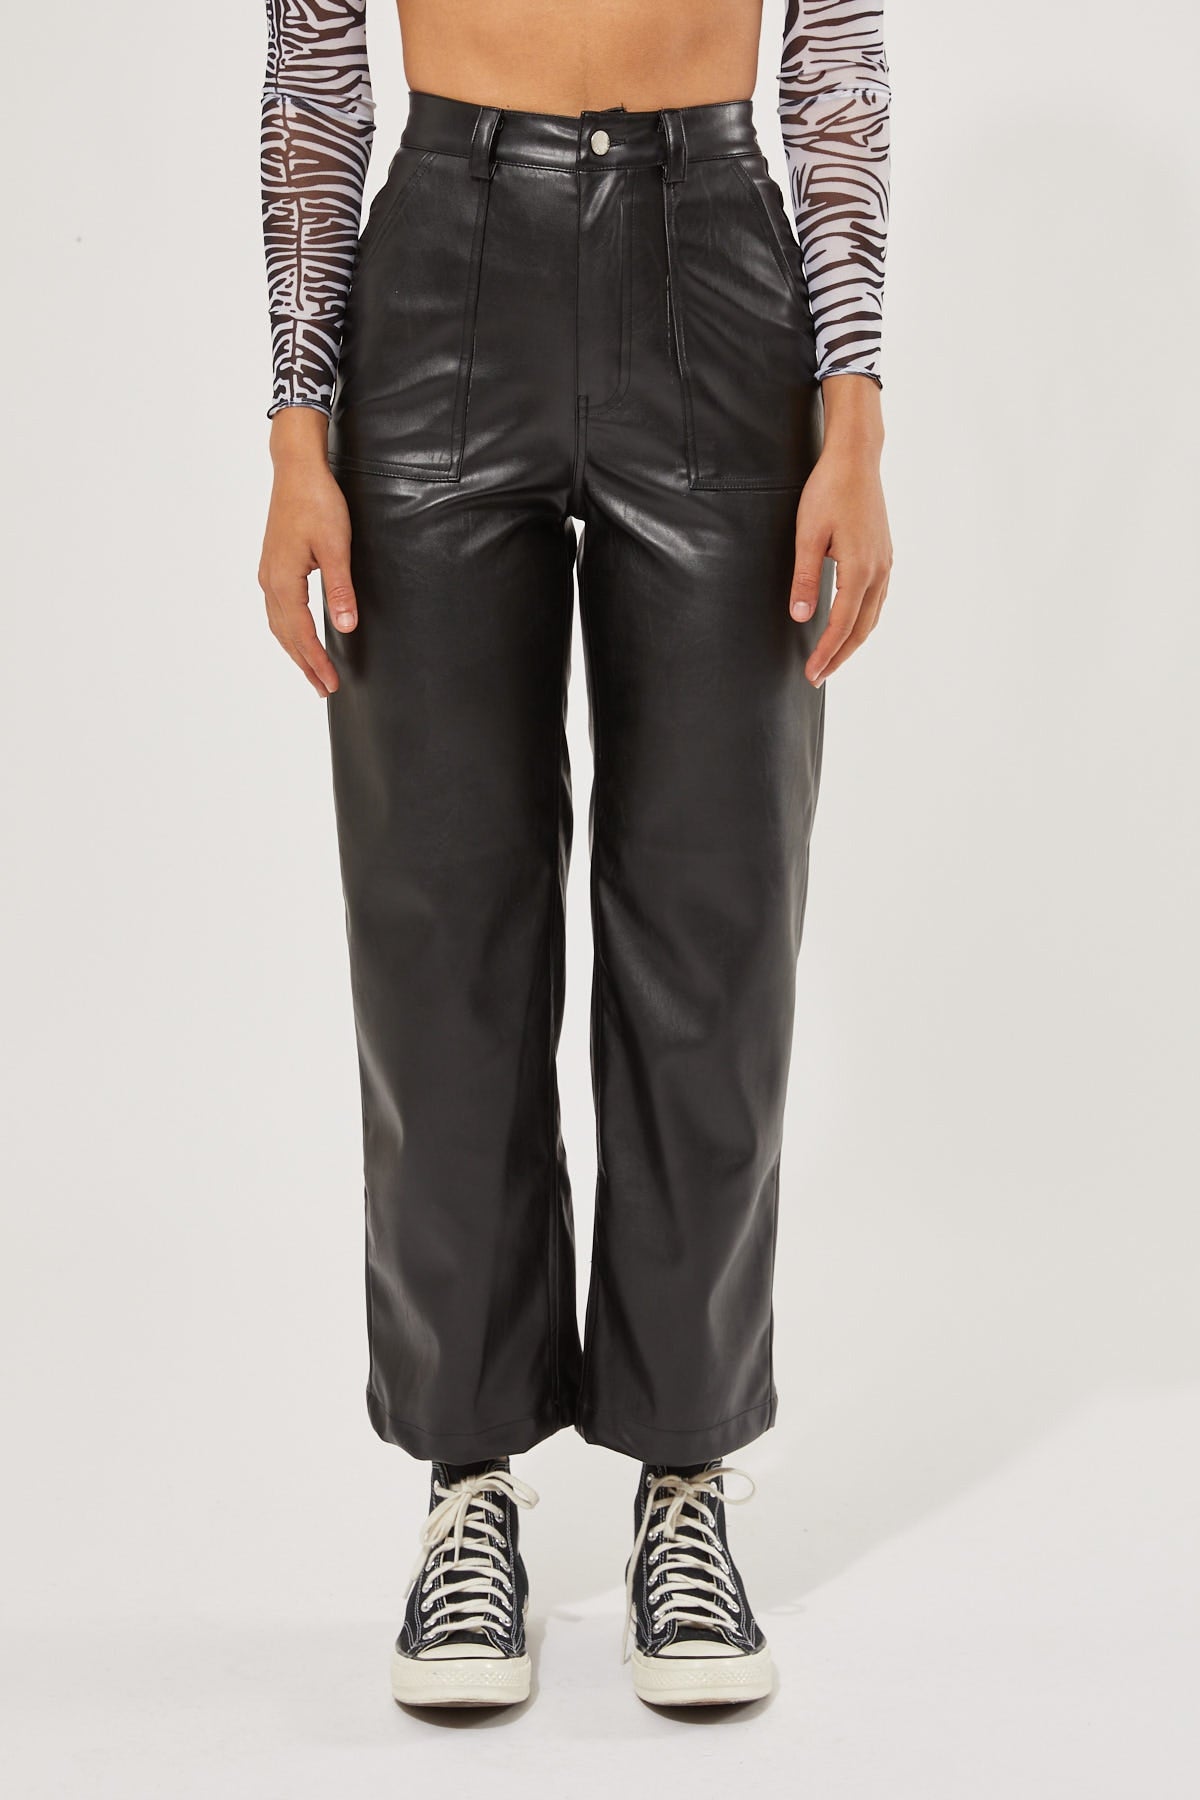 Perfect Stranger Over Now PU Pant Black – Universal Store